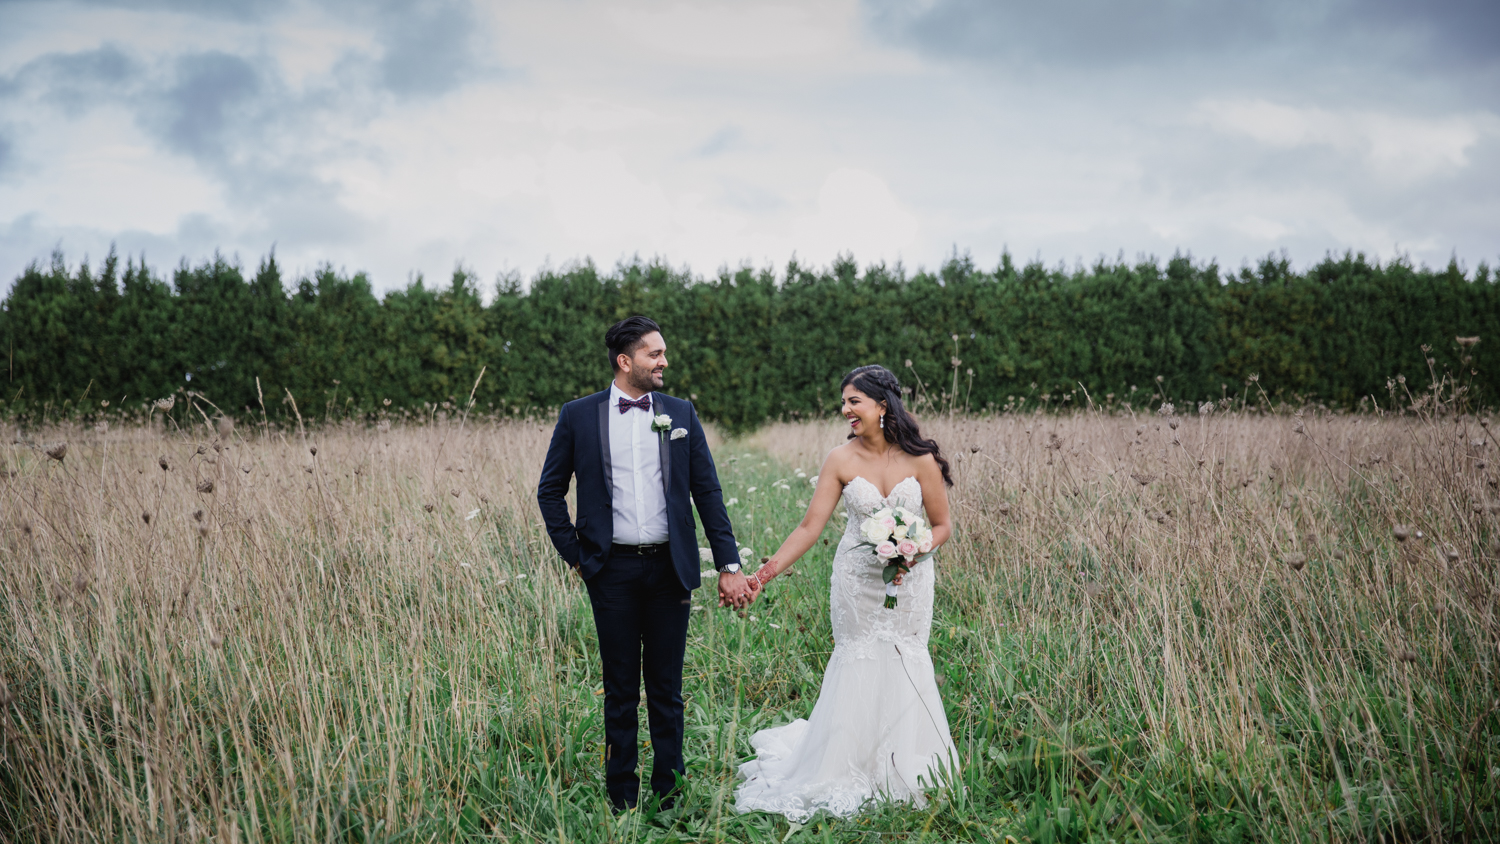 The Bride and Groom taken during their location shoot. This image was taken by Mala Photography, an Auckland based wedding photographer. The wedding was at Markovina Vineyard Estate In Kumeu, Auckland